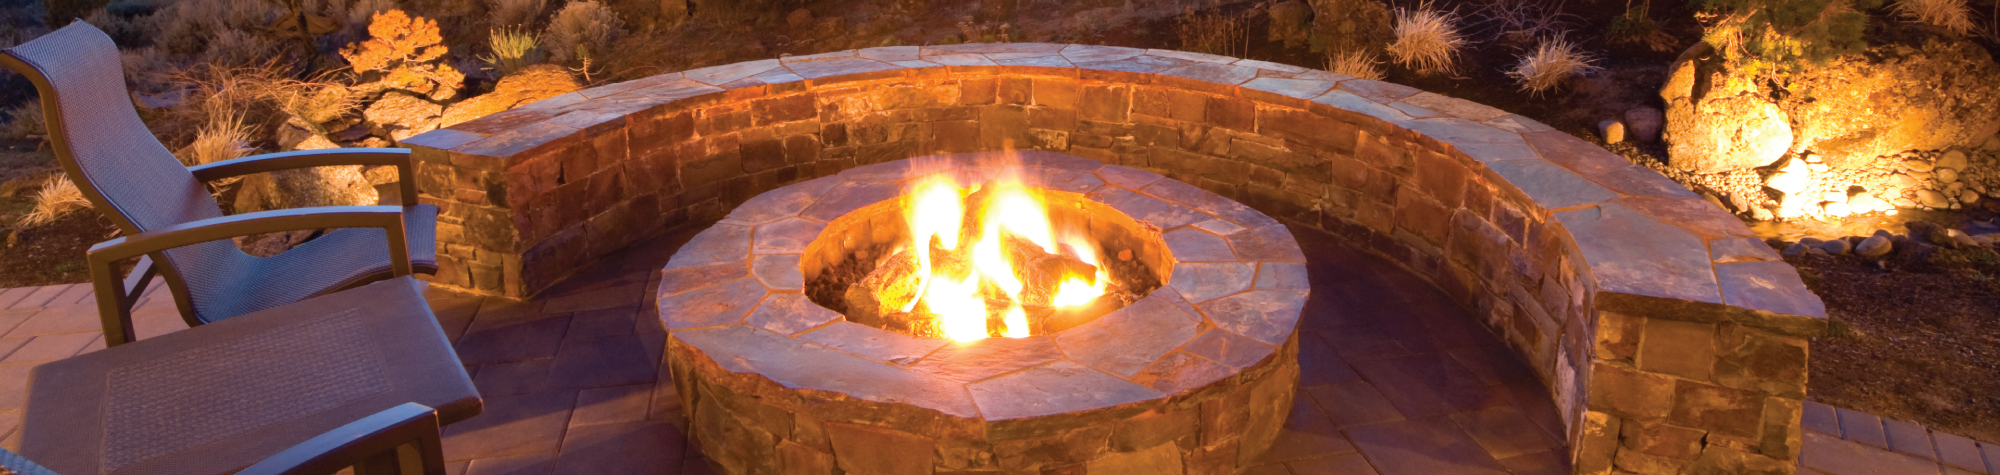 Guidelines for Fire Pit Safety